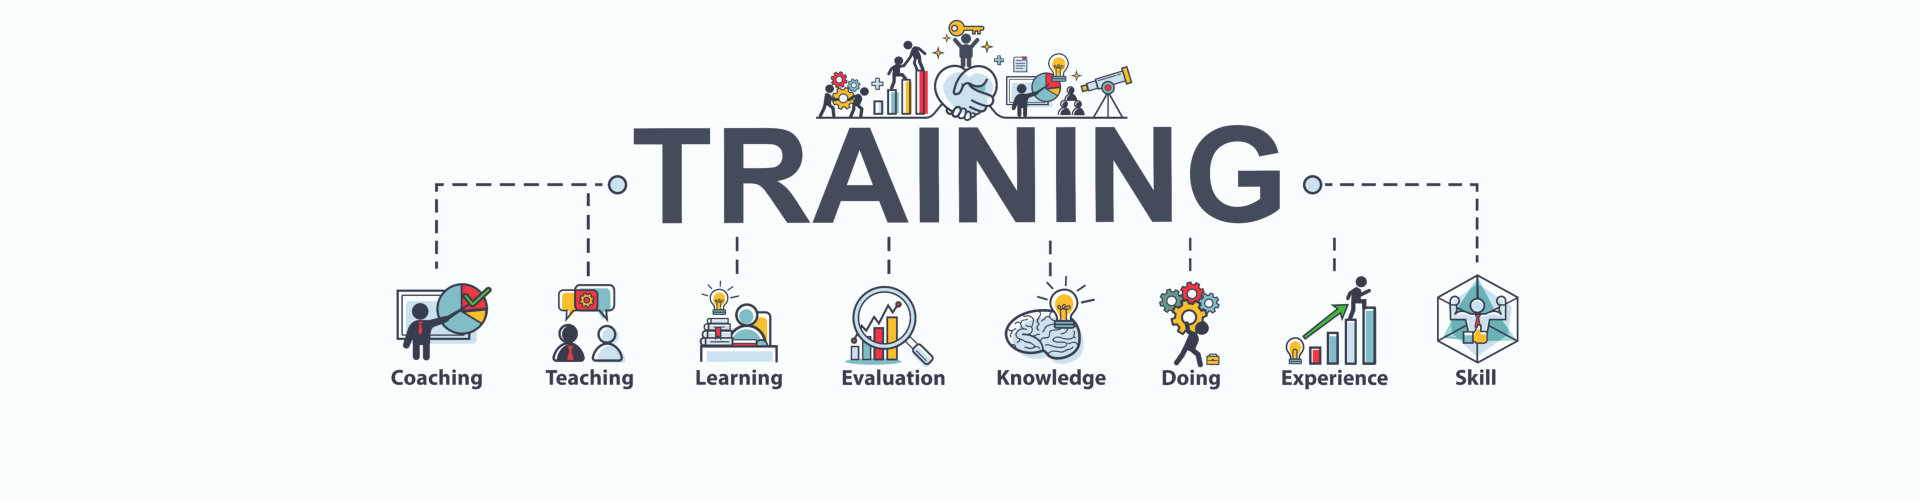 A training banner with icons of learning, evaluation and knowledge.